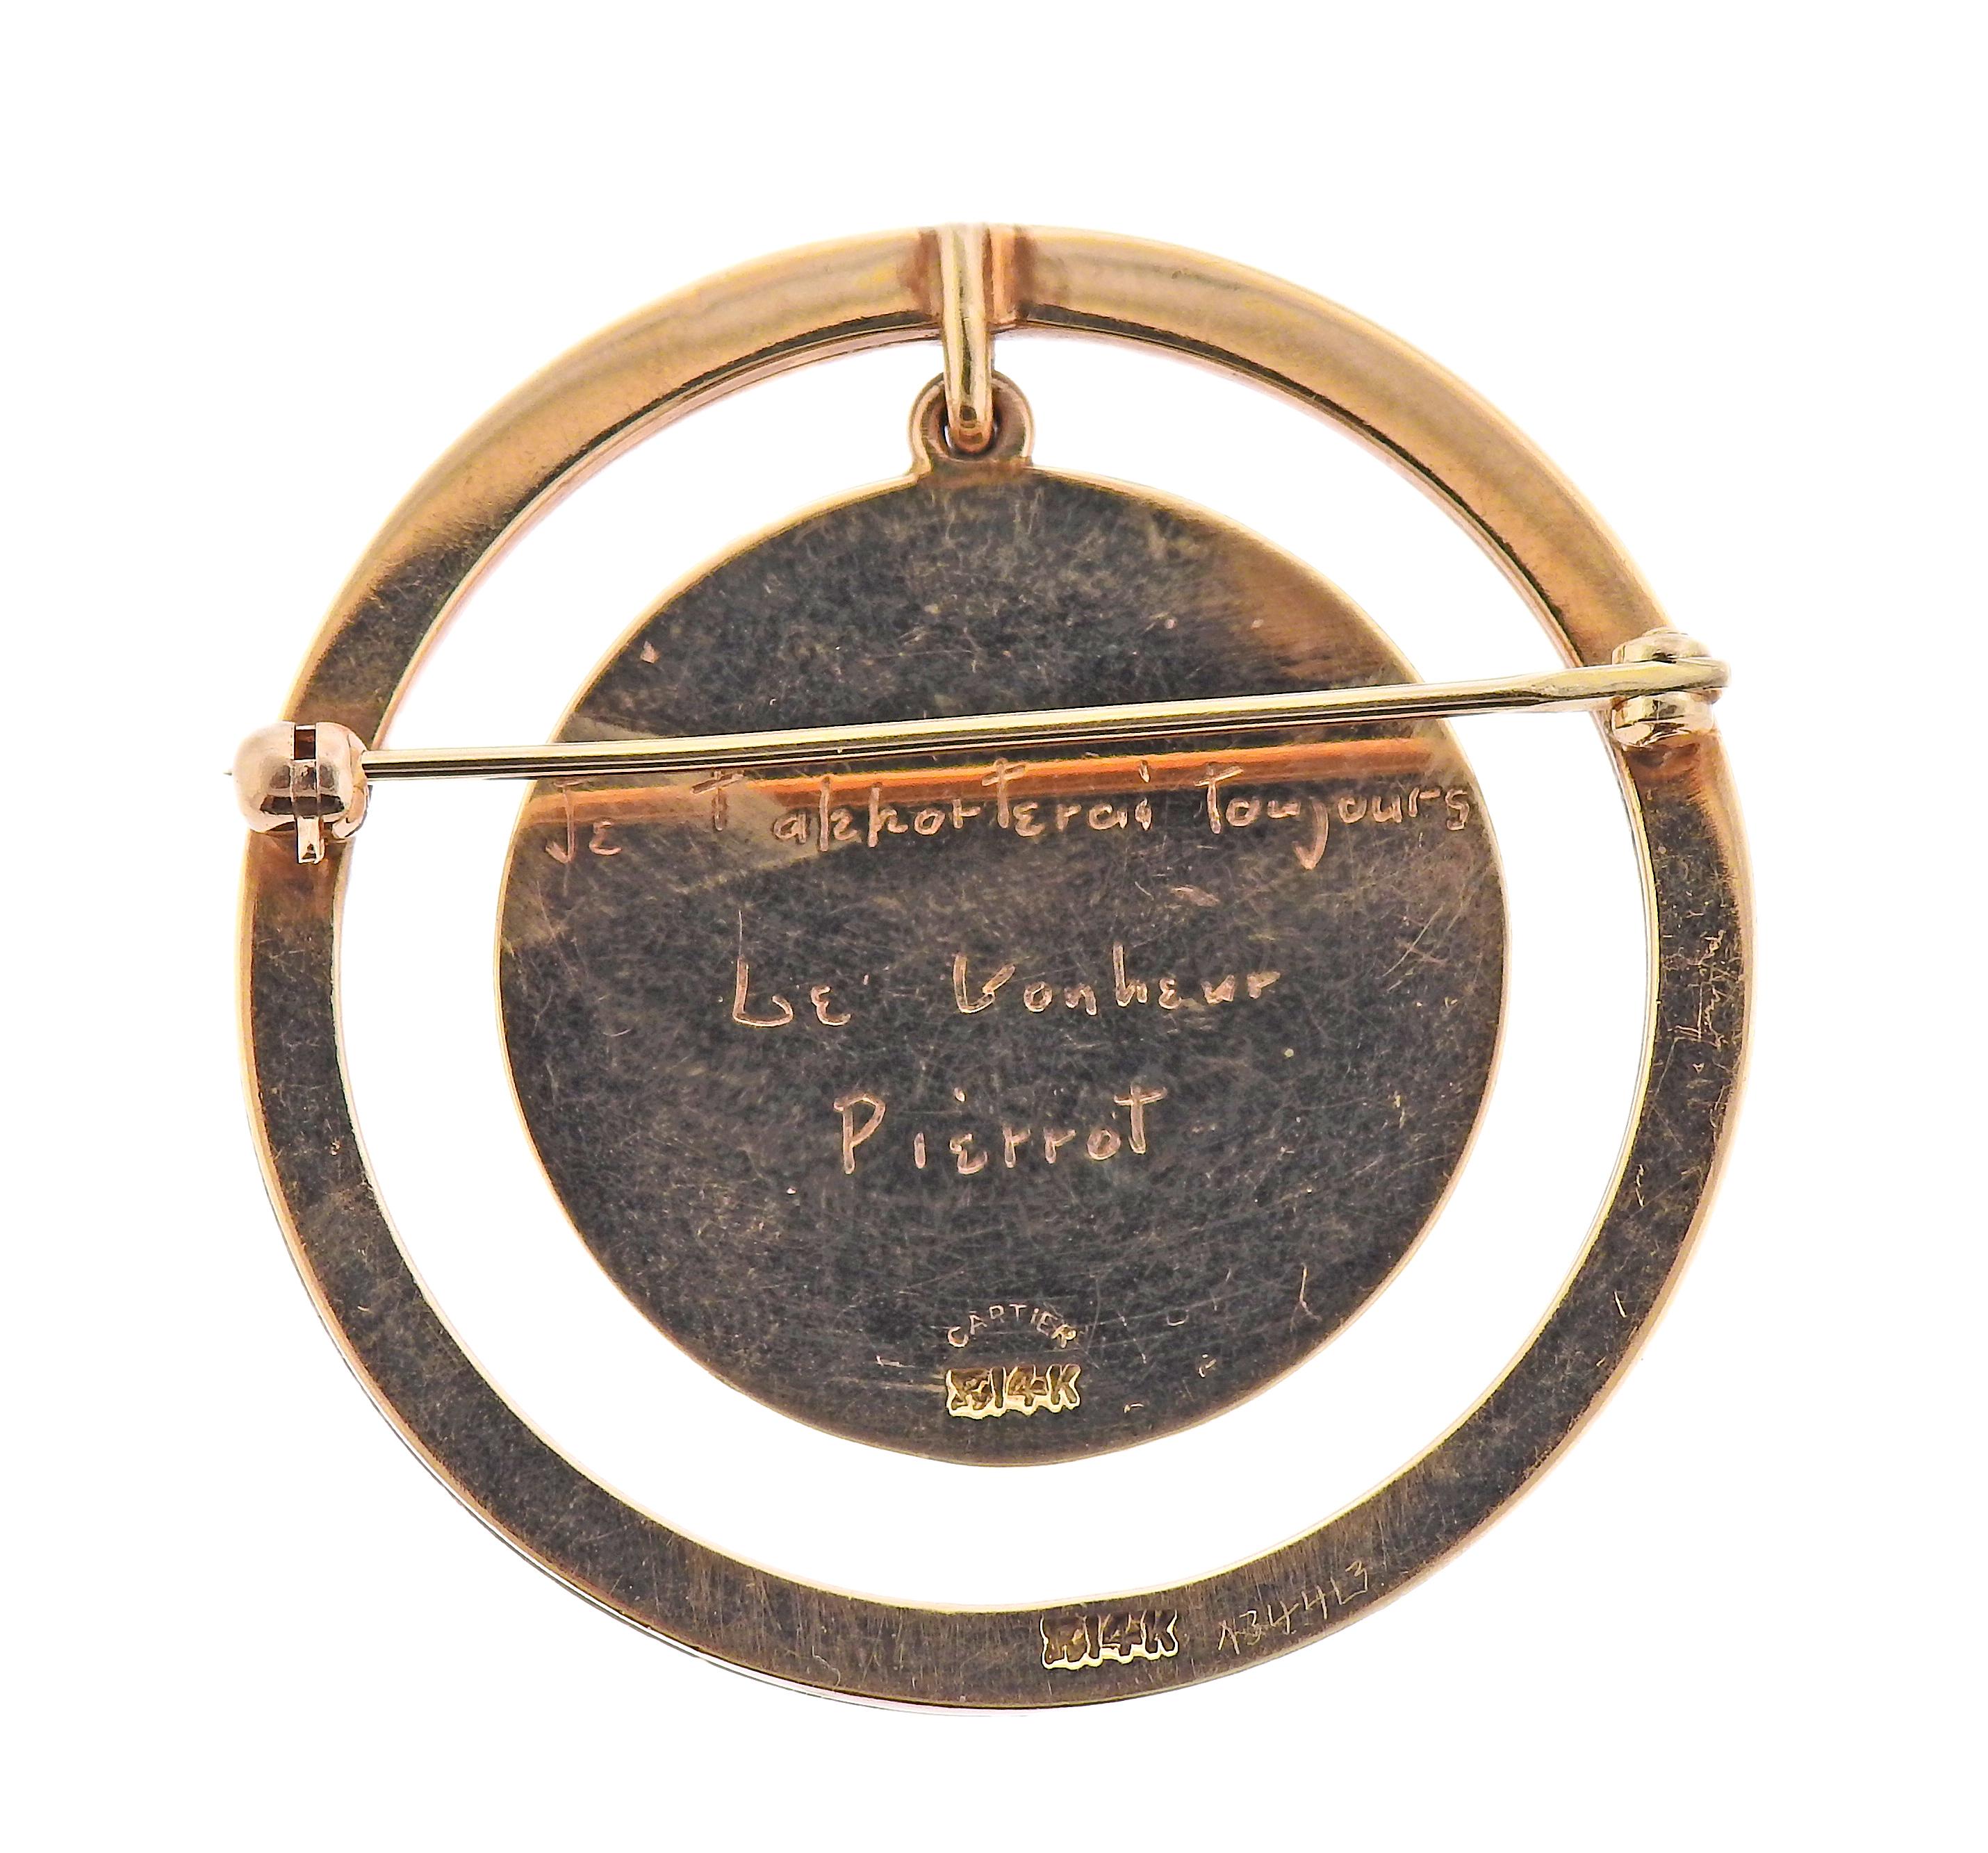 Retro Mid century Cartier 14k gold circle brooch, depicting poodle dog. Brooch is 37mm in diameter. Marked: 14k, Cartier. engraving on the back - see photo.  Weight - 14.9 grams. 